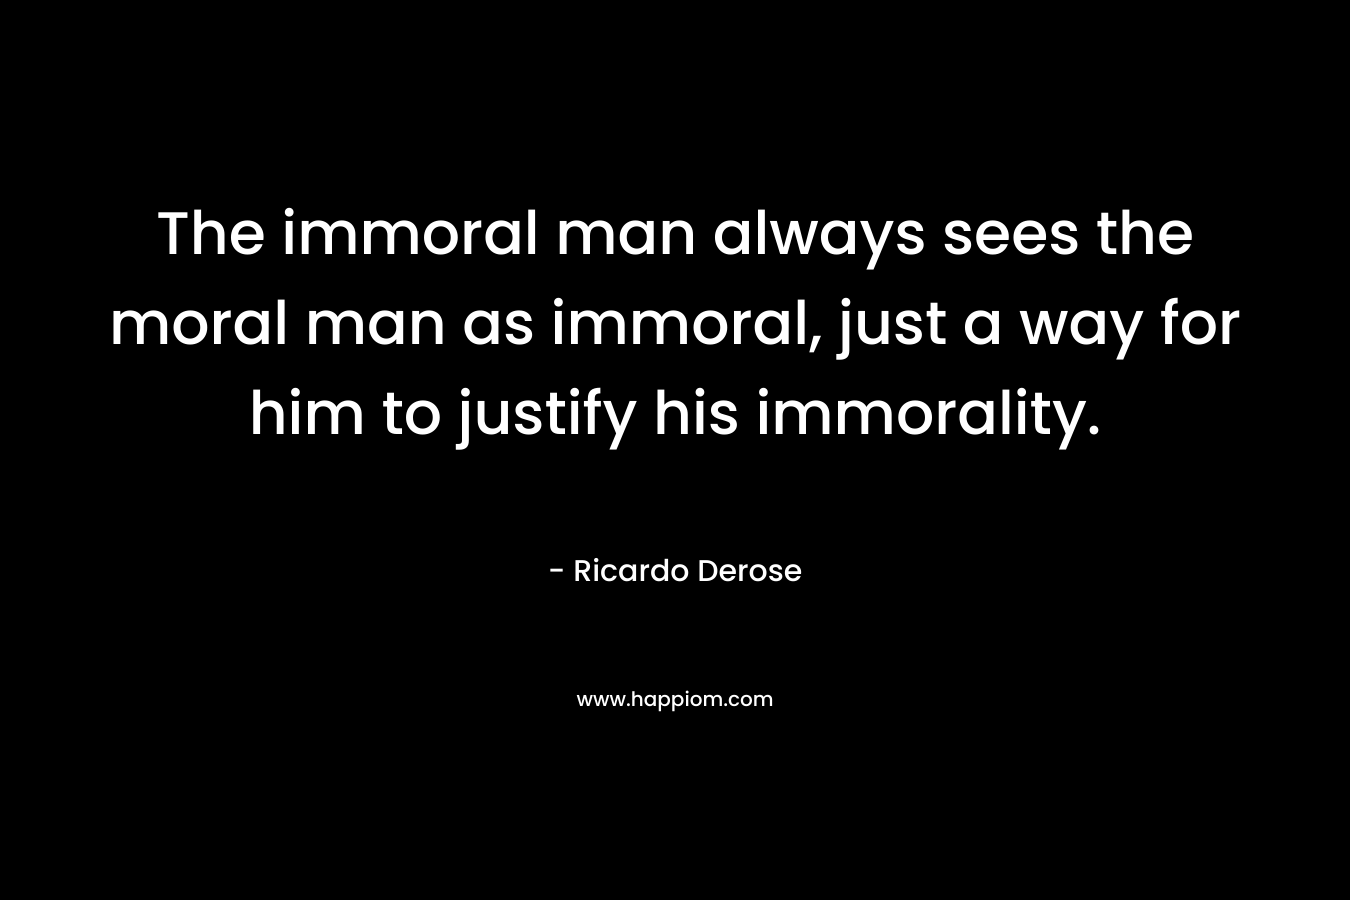 The immoral man always sees the moral man as immoral, just a way for him to justify his immorality.